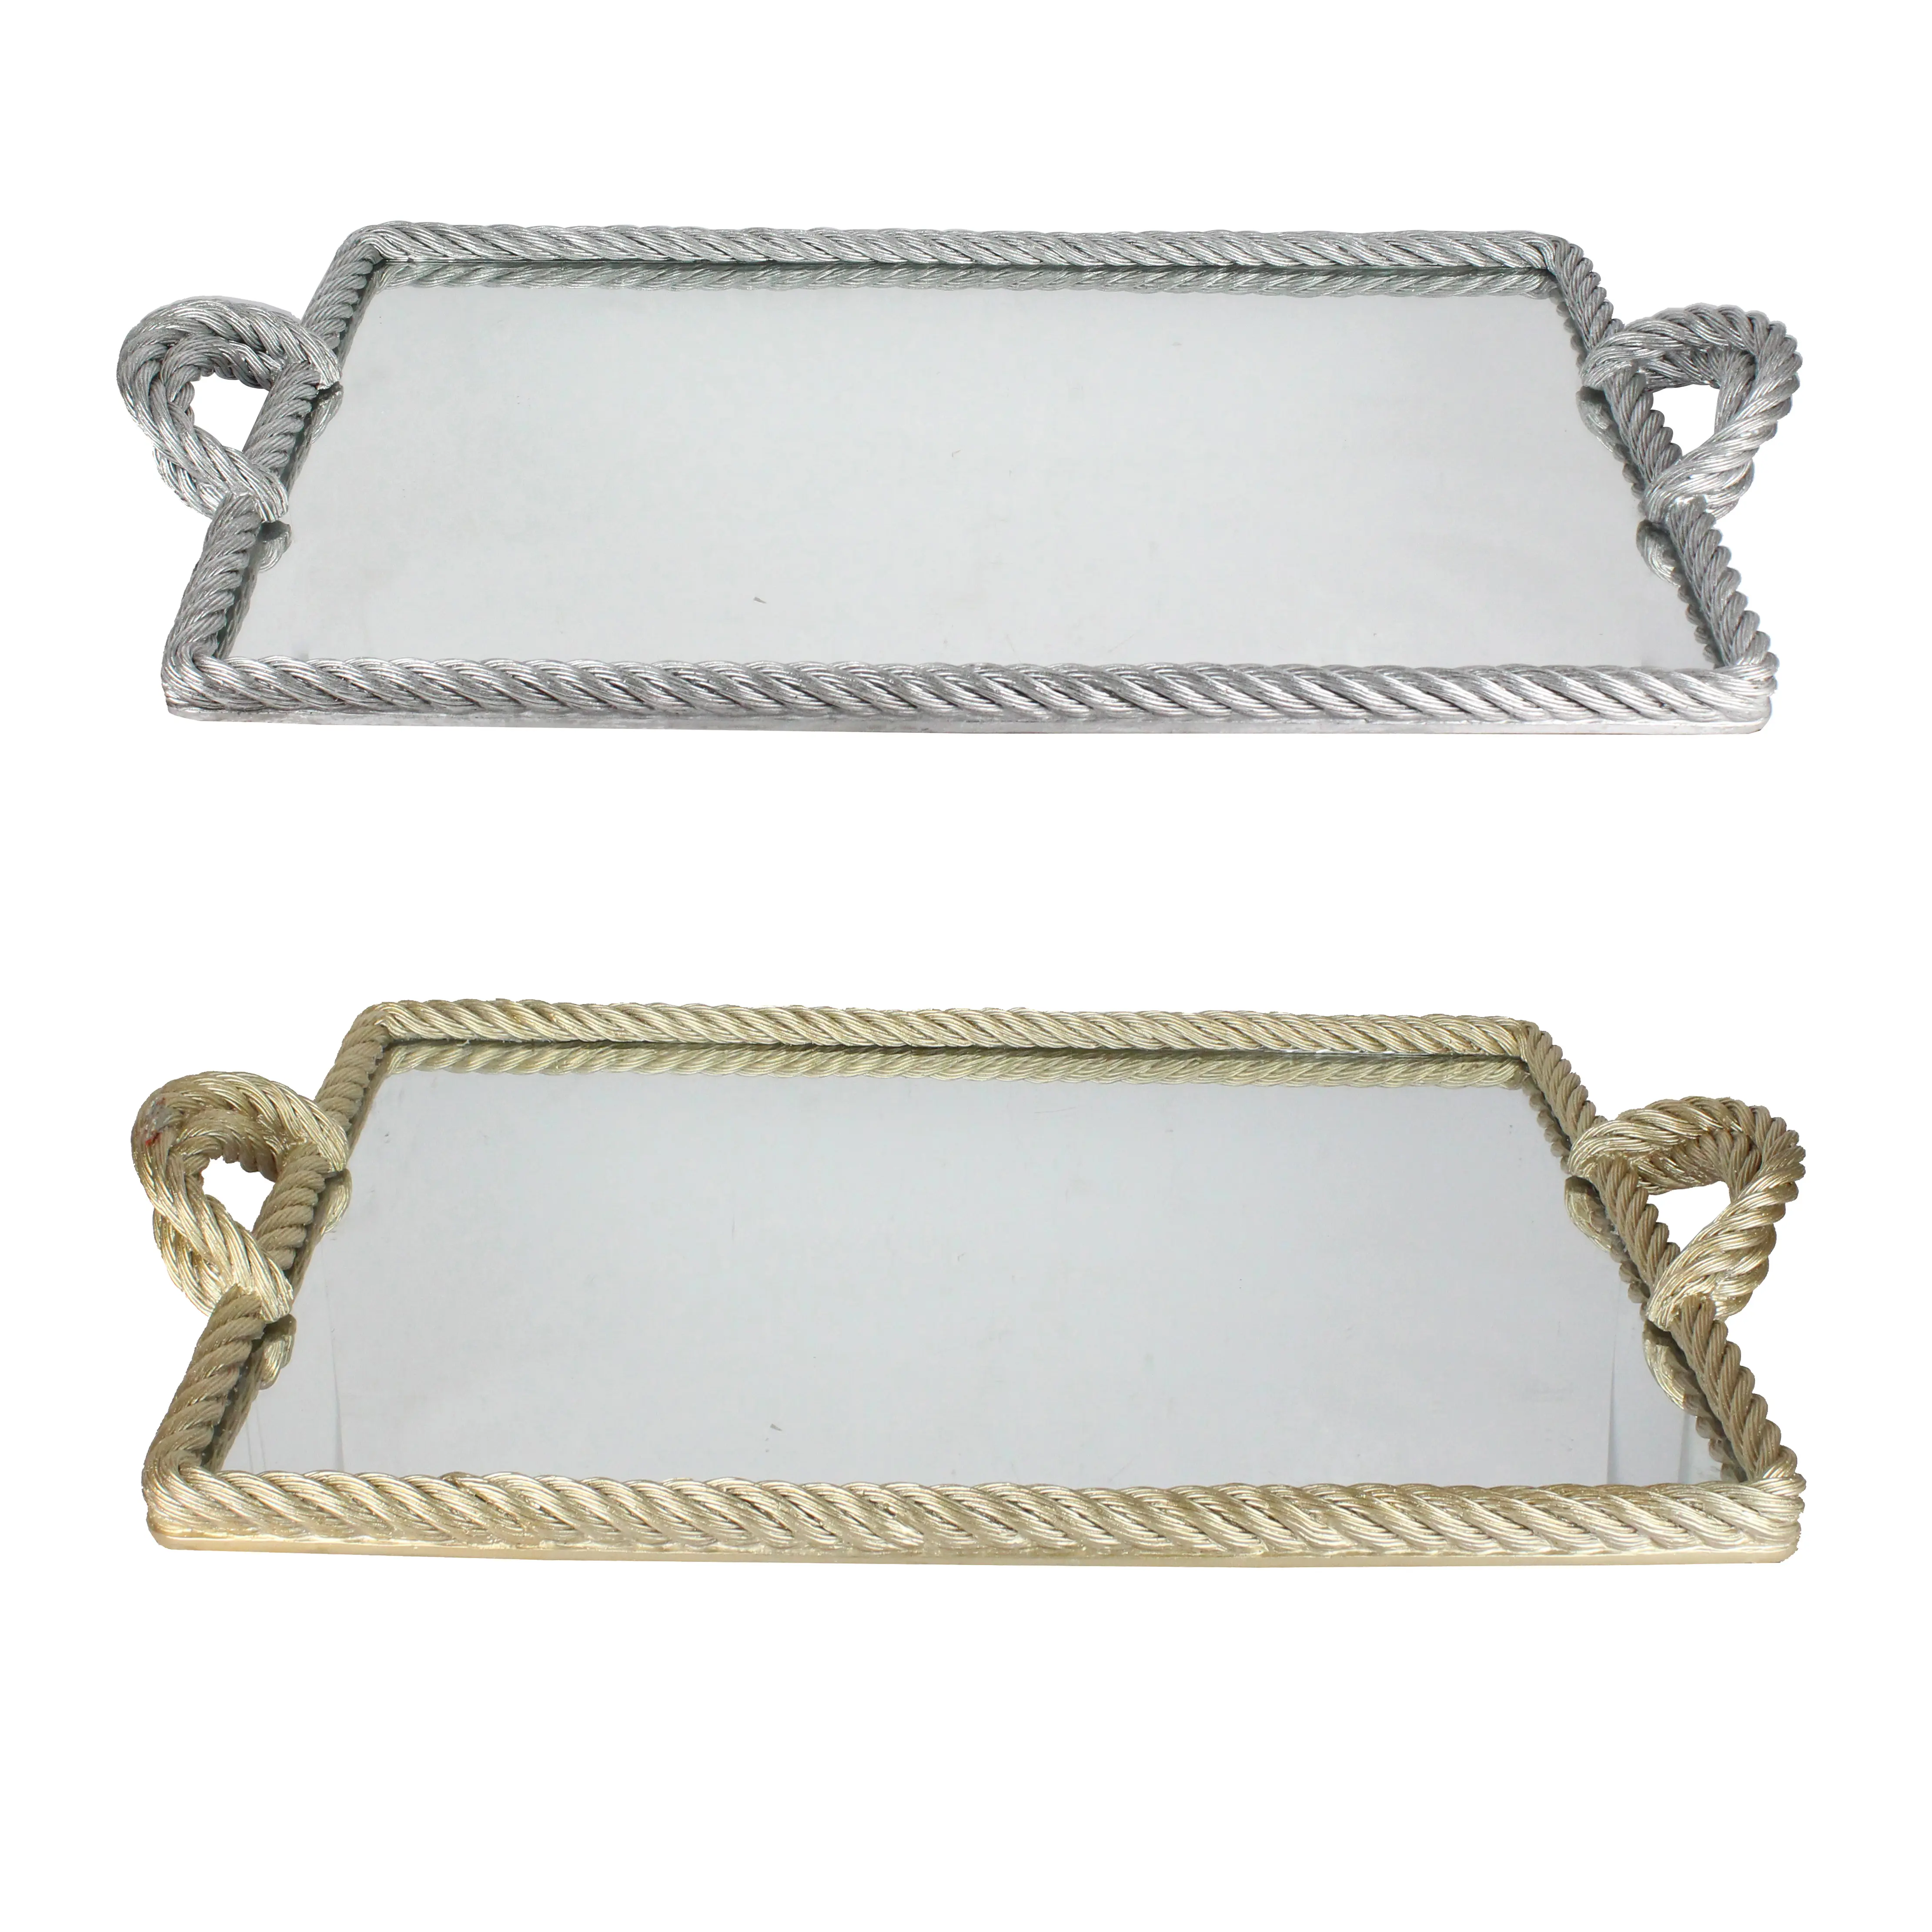 Decorative Mirror Serving Tray Resin Rope Gold Handle Wedding Available 30% Deposit Accpectable Beautiful Picture Shine D CN;FUJ